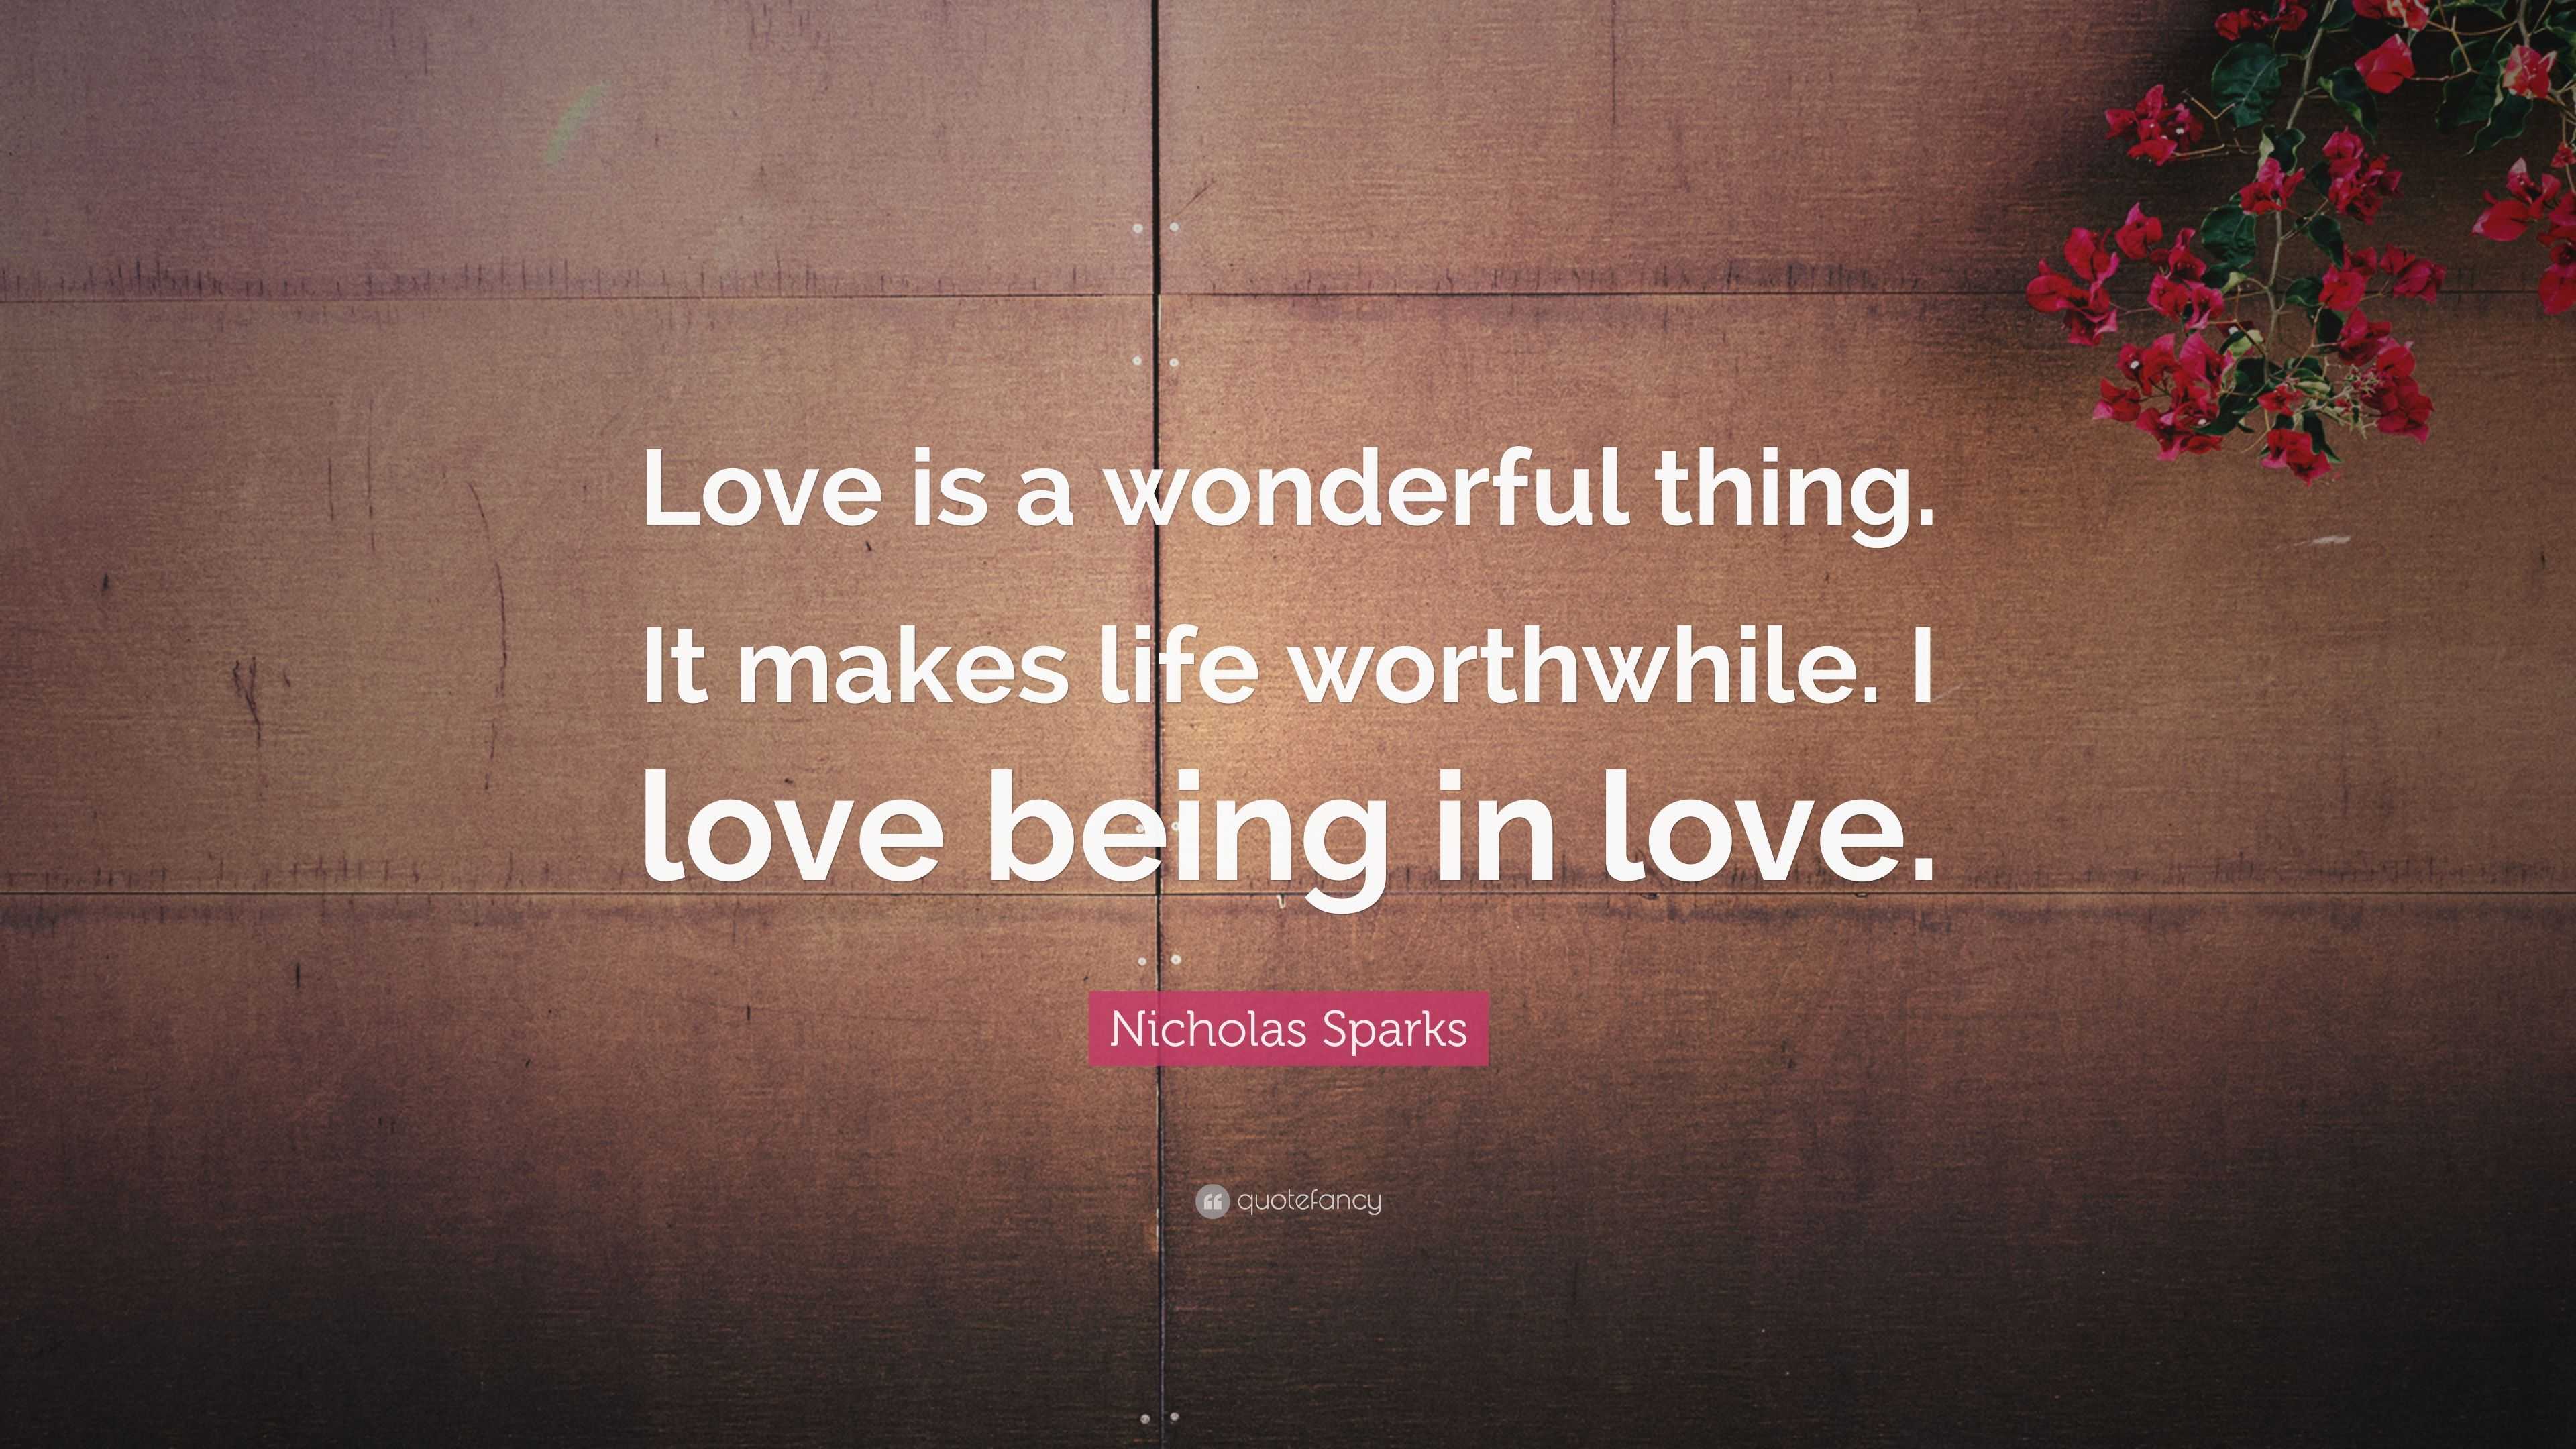 Nicholas Sparks Quote: “Love is a wonderful thing. It makes life ...